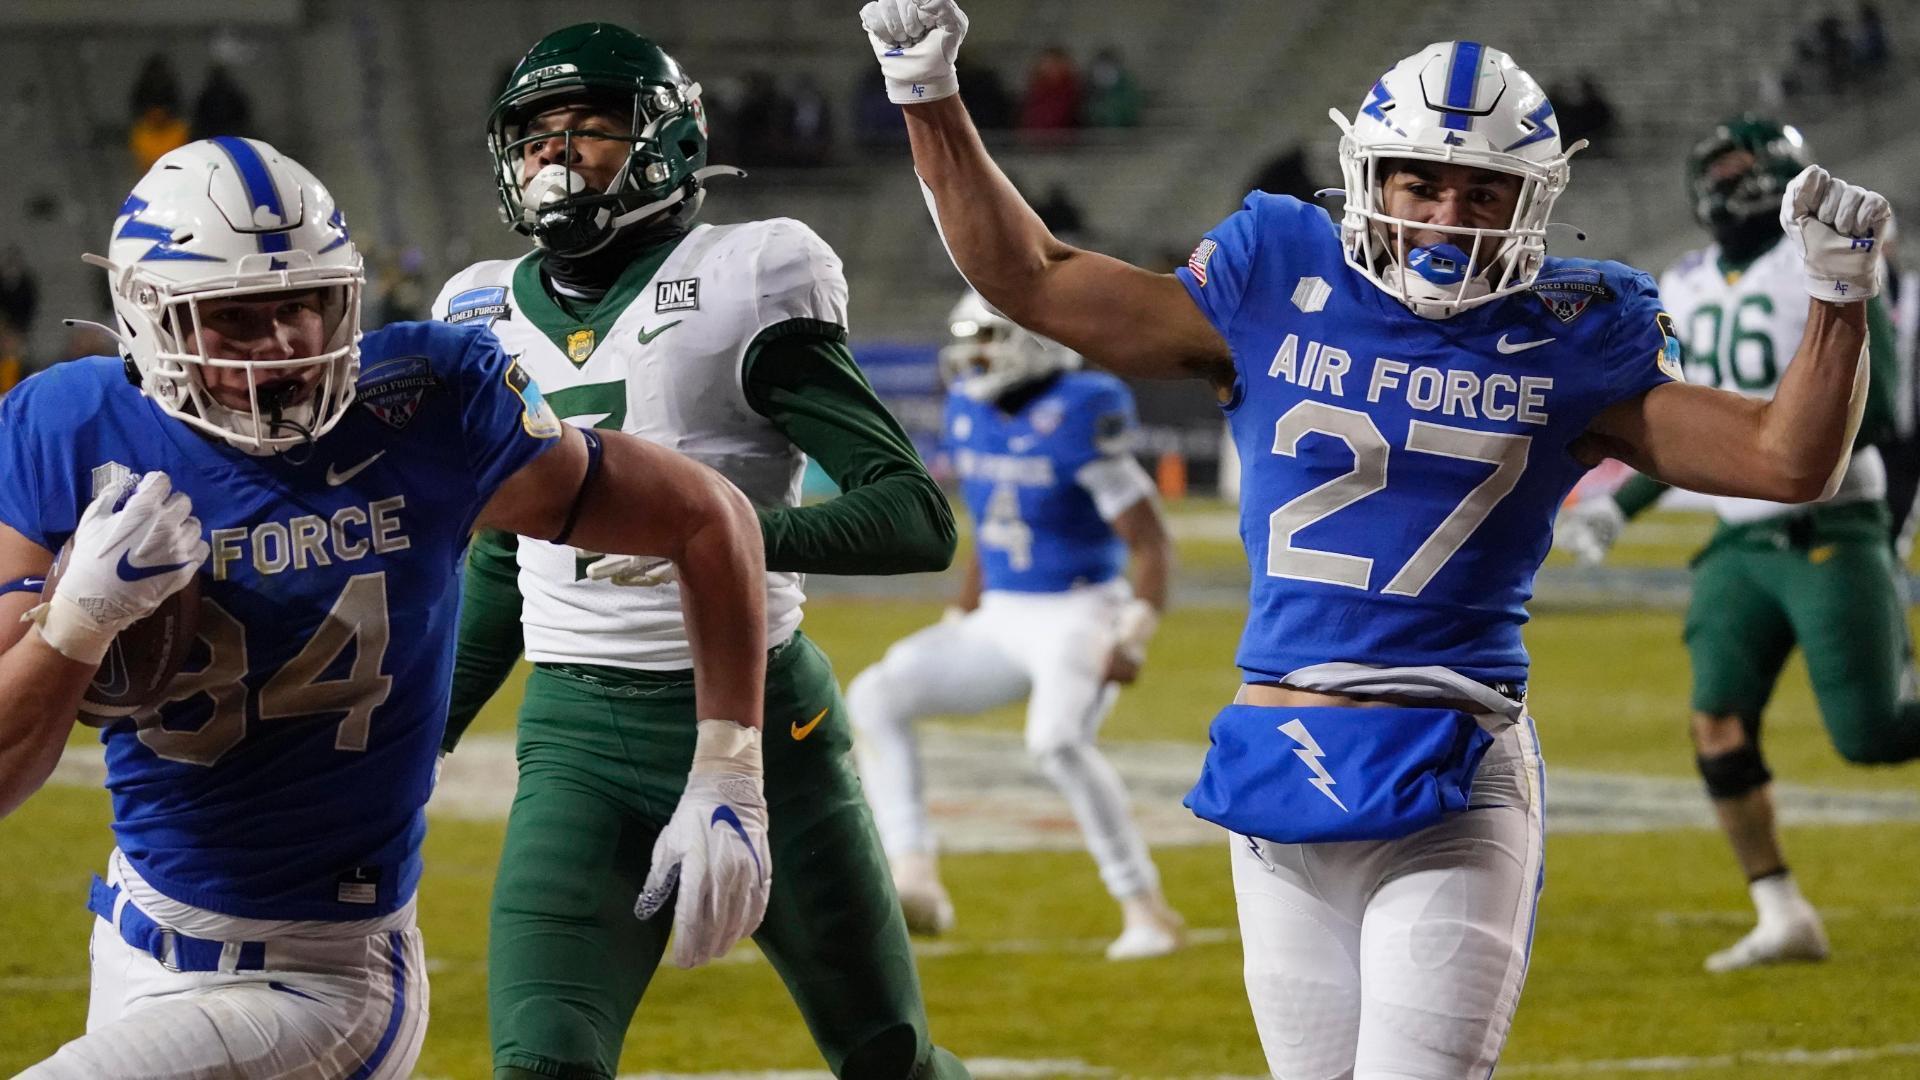 ESPN - Air Force Football will honor the Tuskegee Airmen on